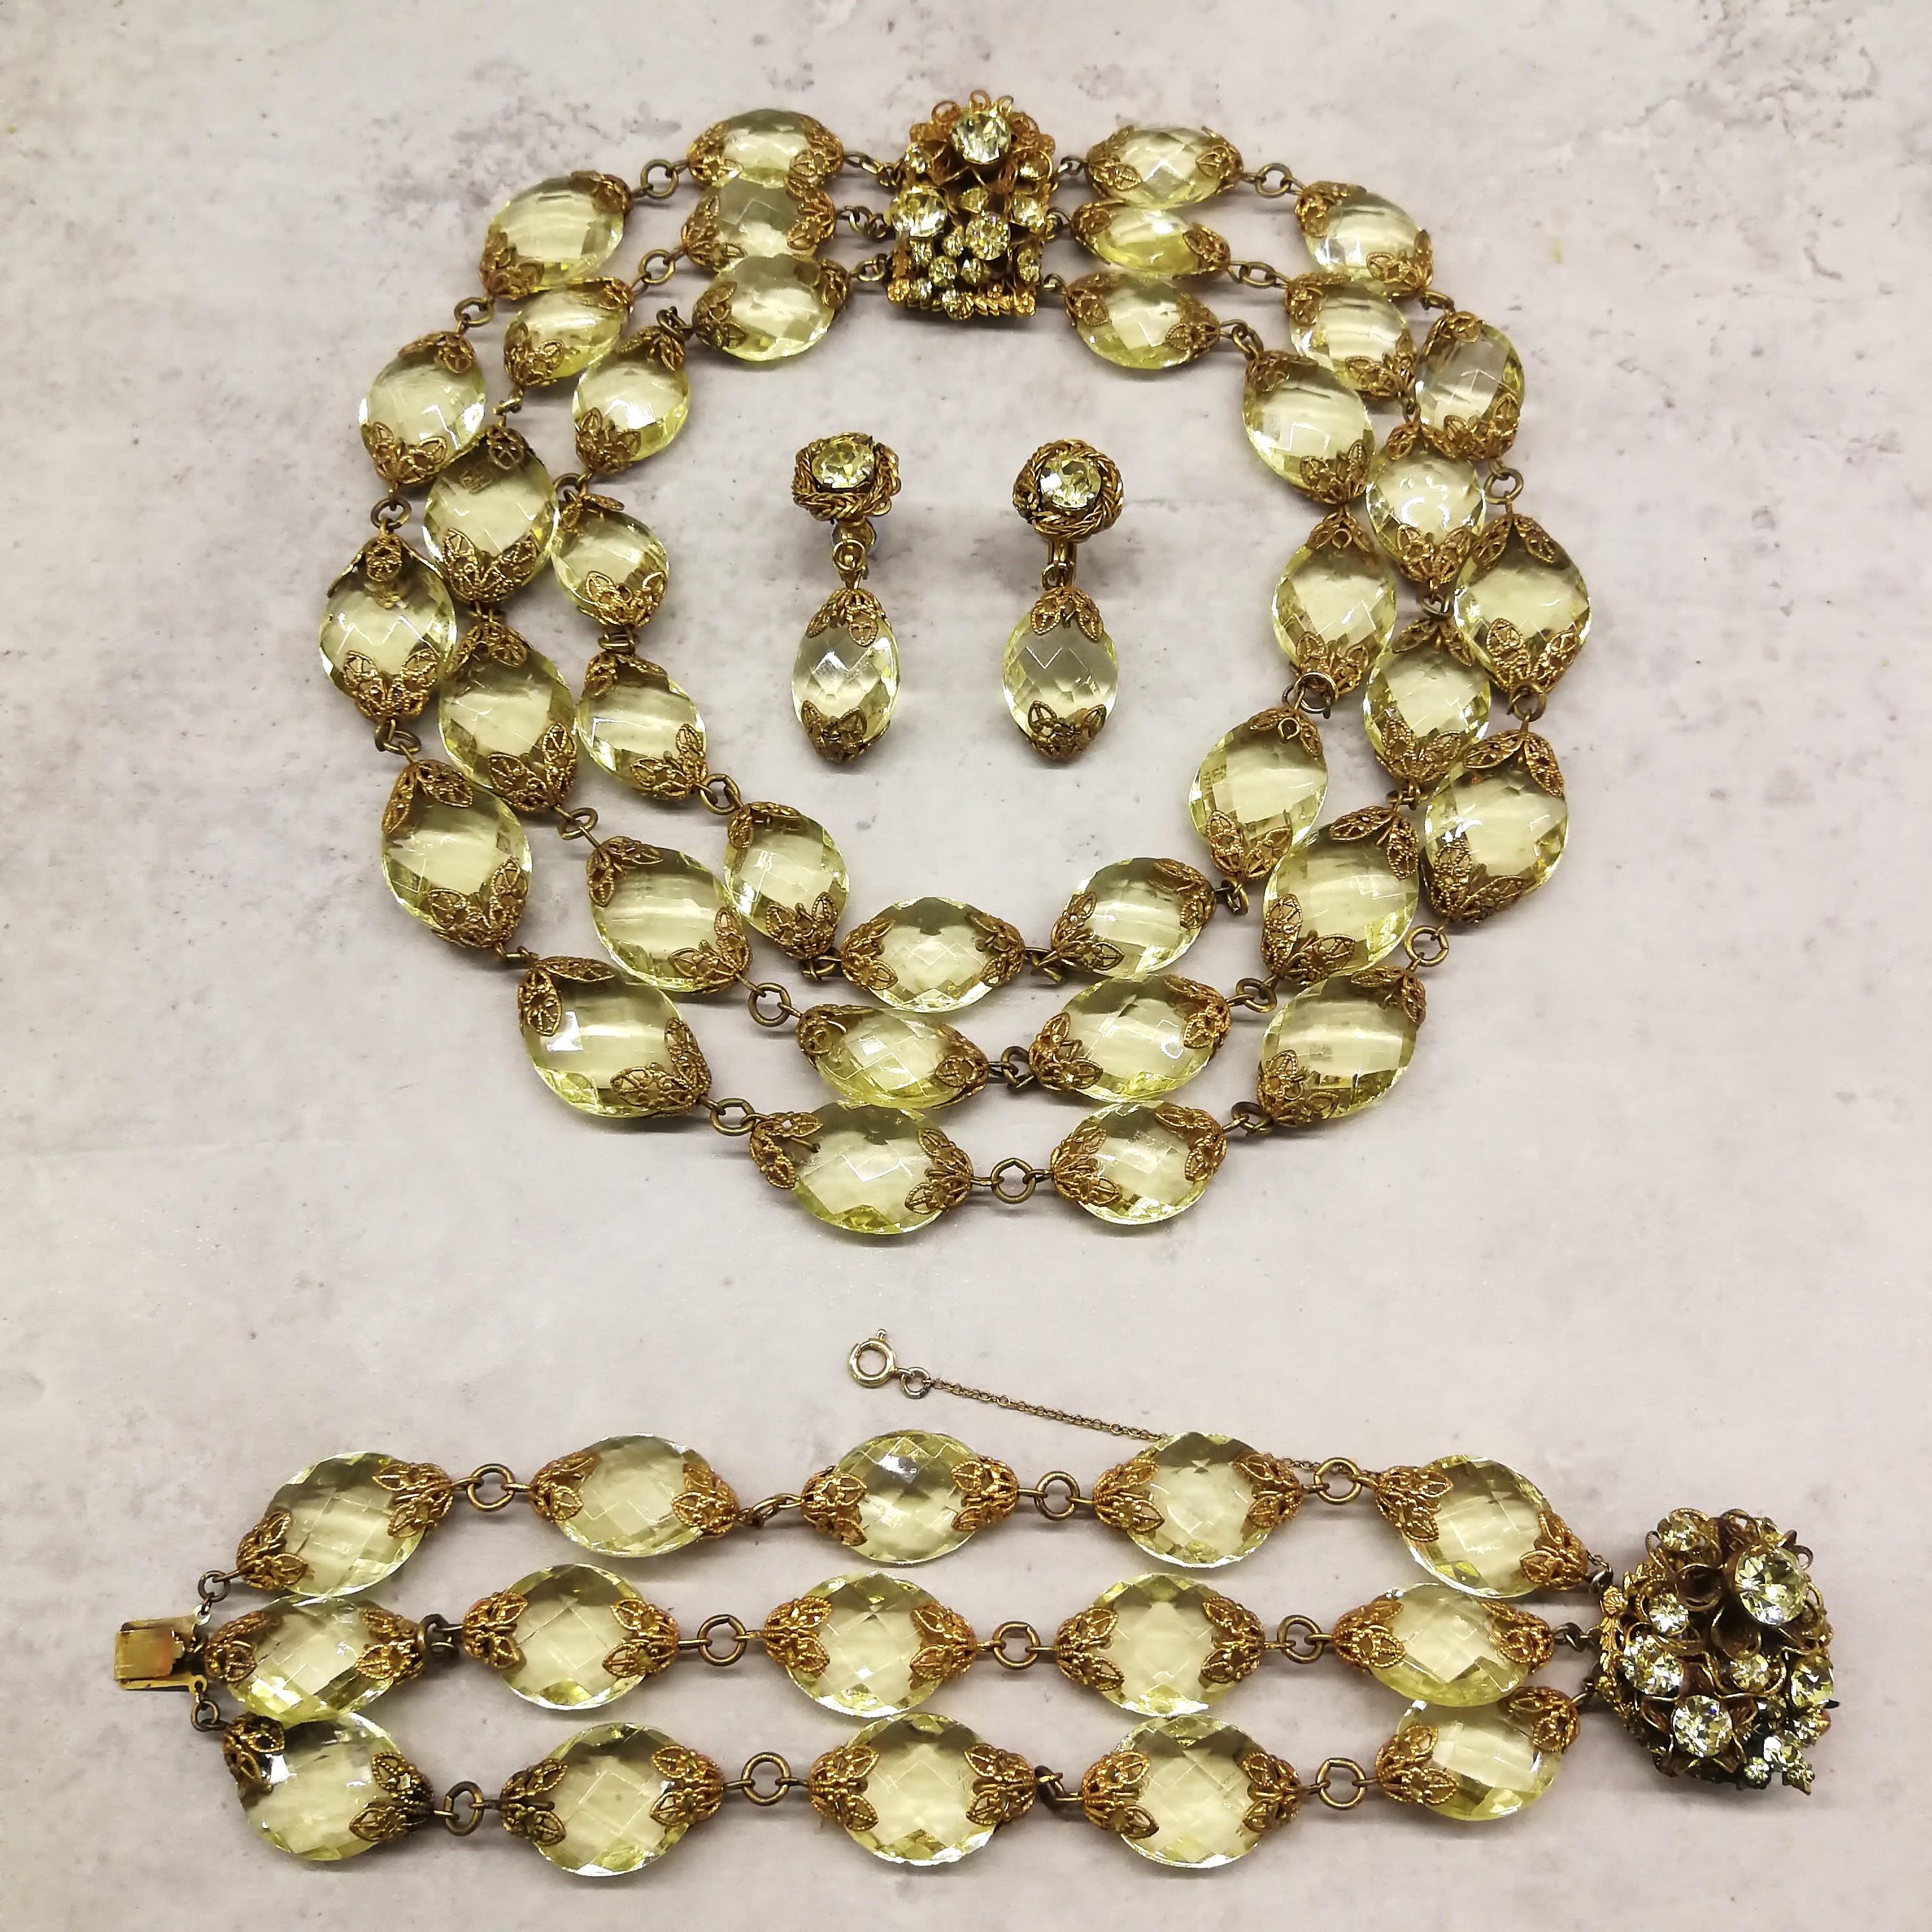 A very sumptuous and very glamorous parure, necklace, bracelet and earrings, from Miriam Haskell in the 1960s. Composed of faceted faux citrine ovals, held in gilt metal terminals, the clasp of both the necklace and the bracelet have typical Haskell